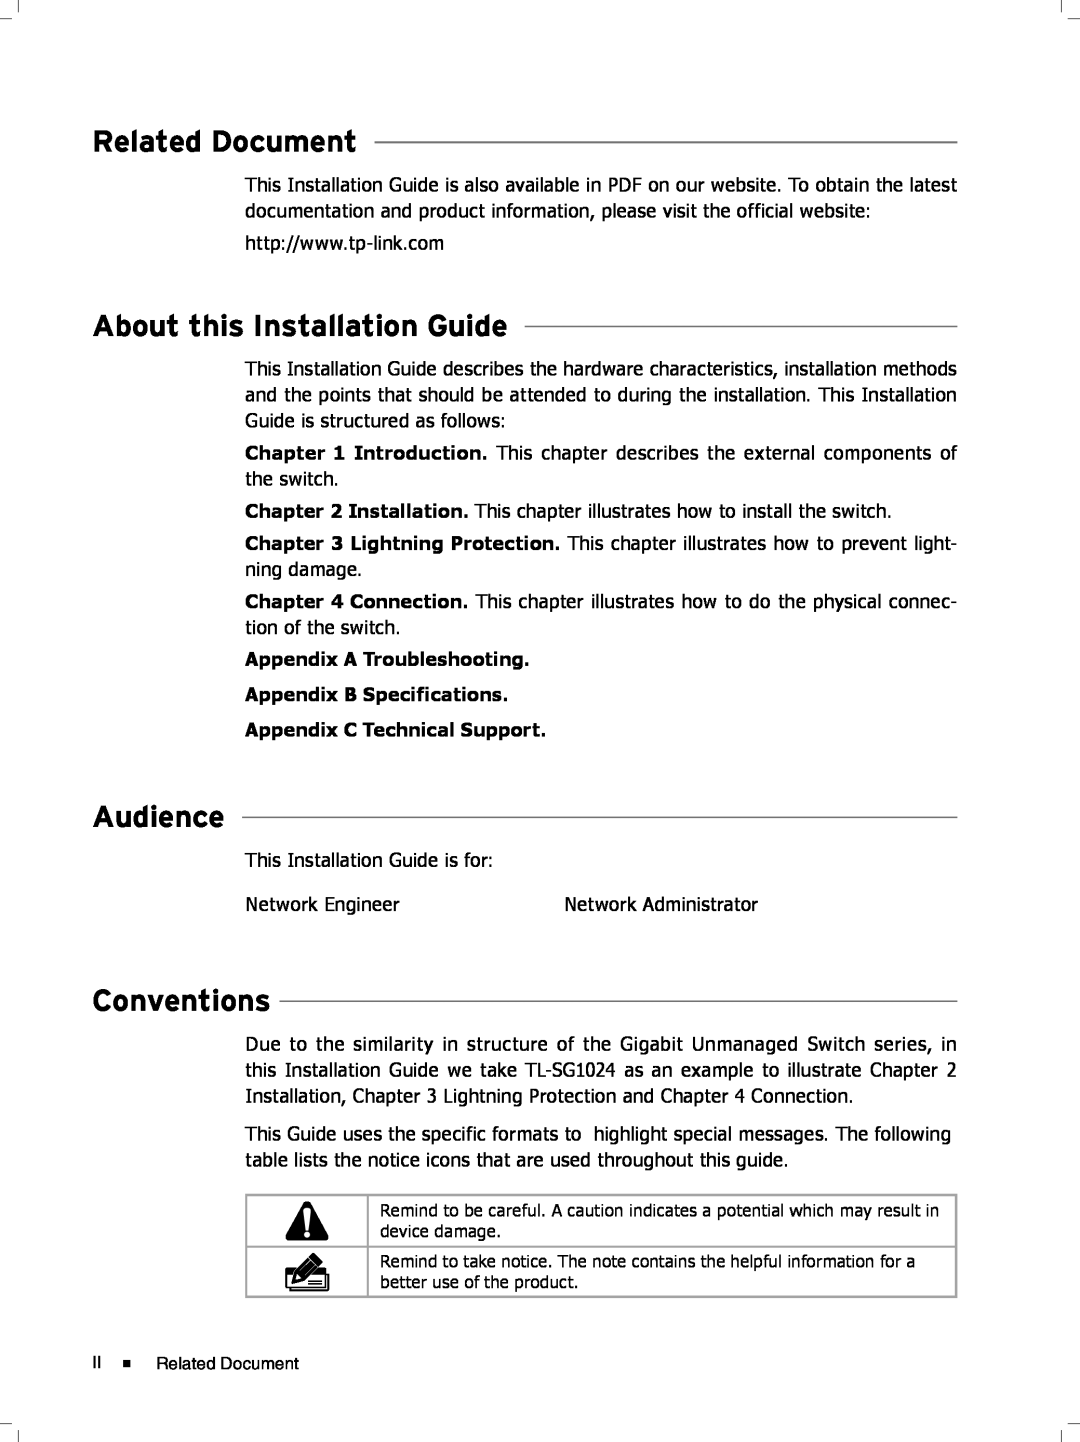 TP-Link tl-sg1048 Related Document, About this Installation Guide, Audience, Conventions, Appendix C Technical Support 